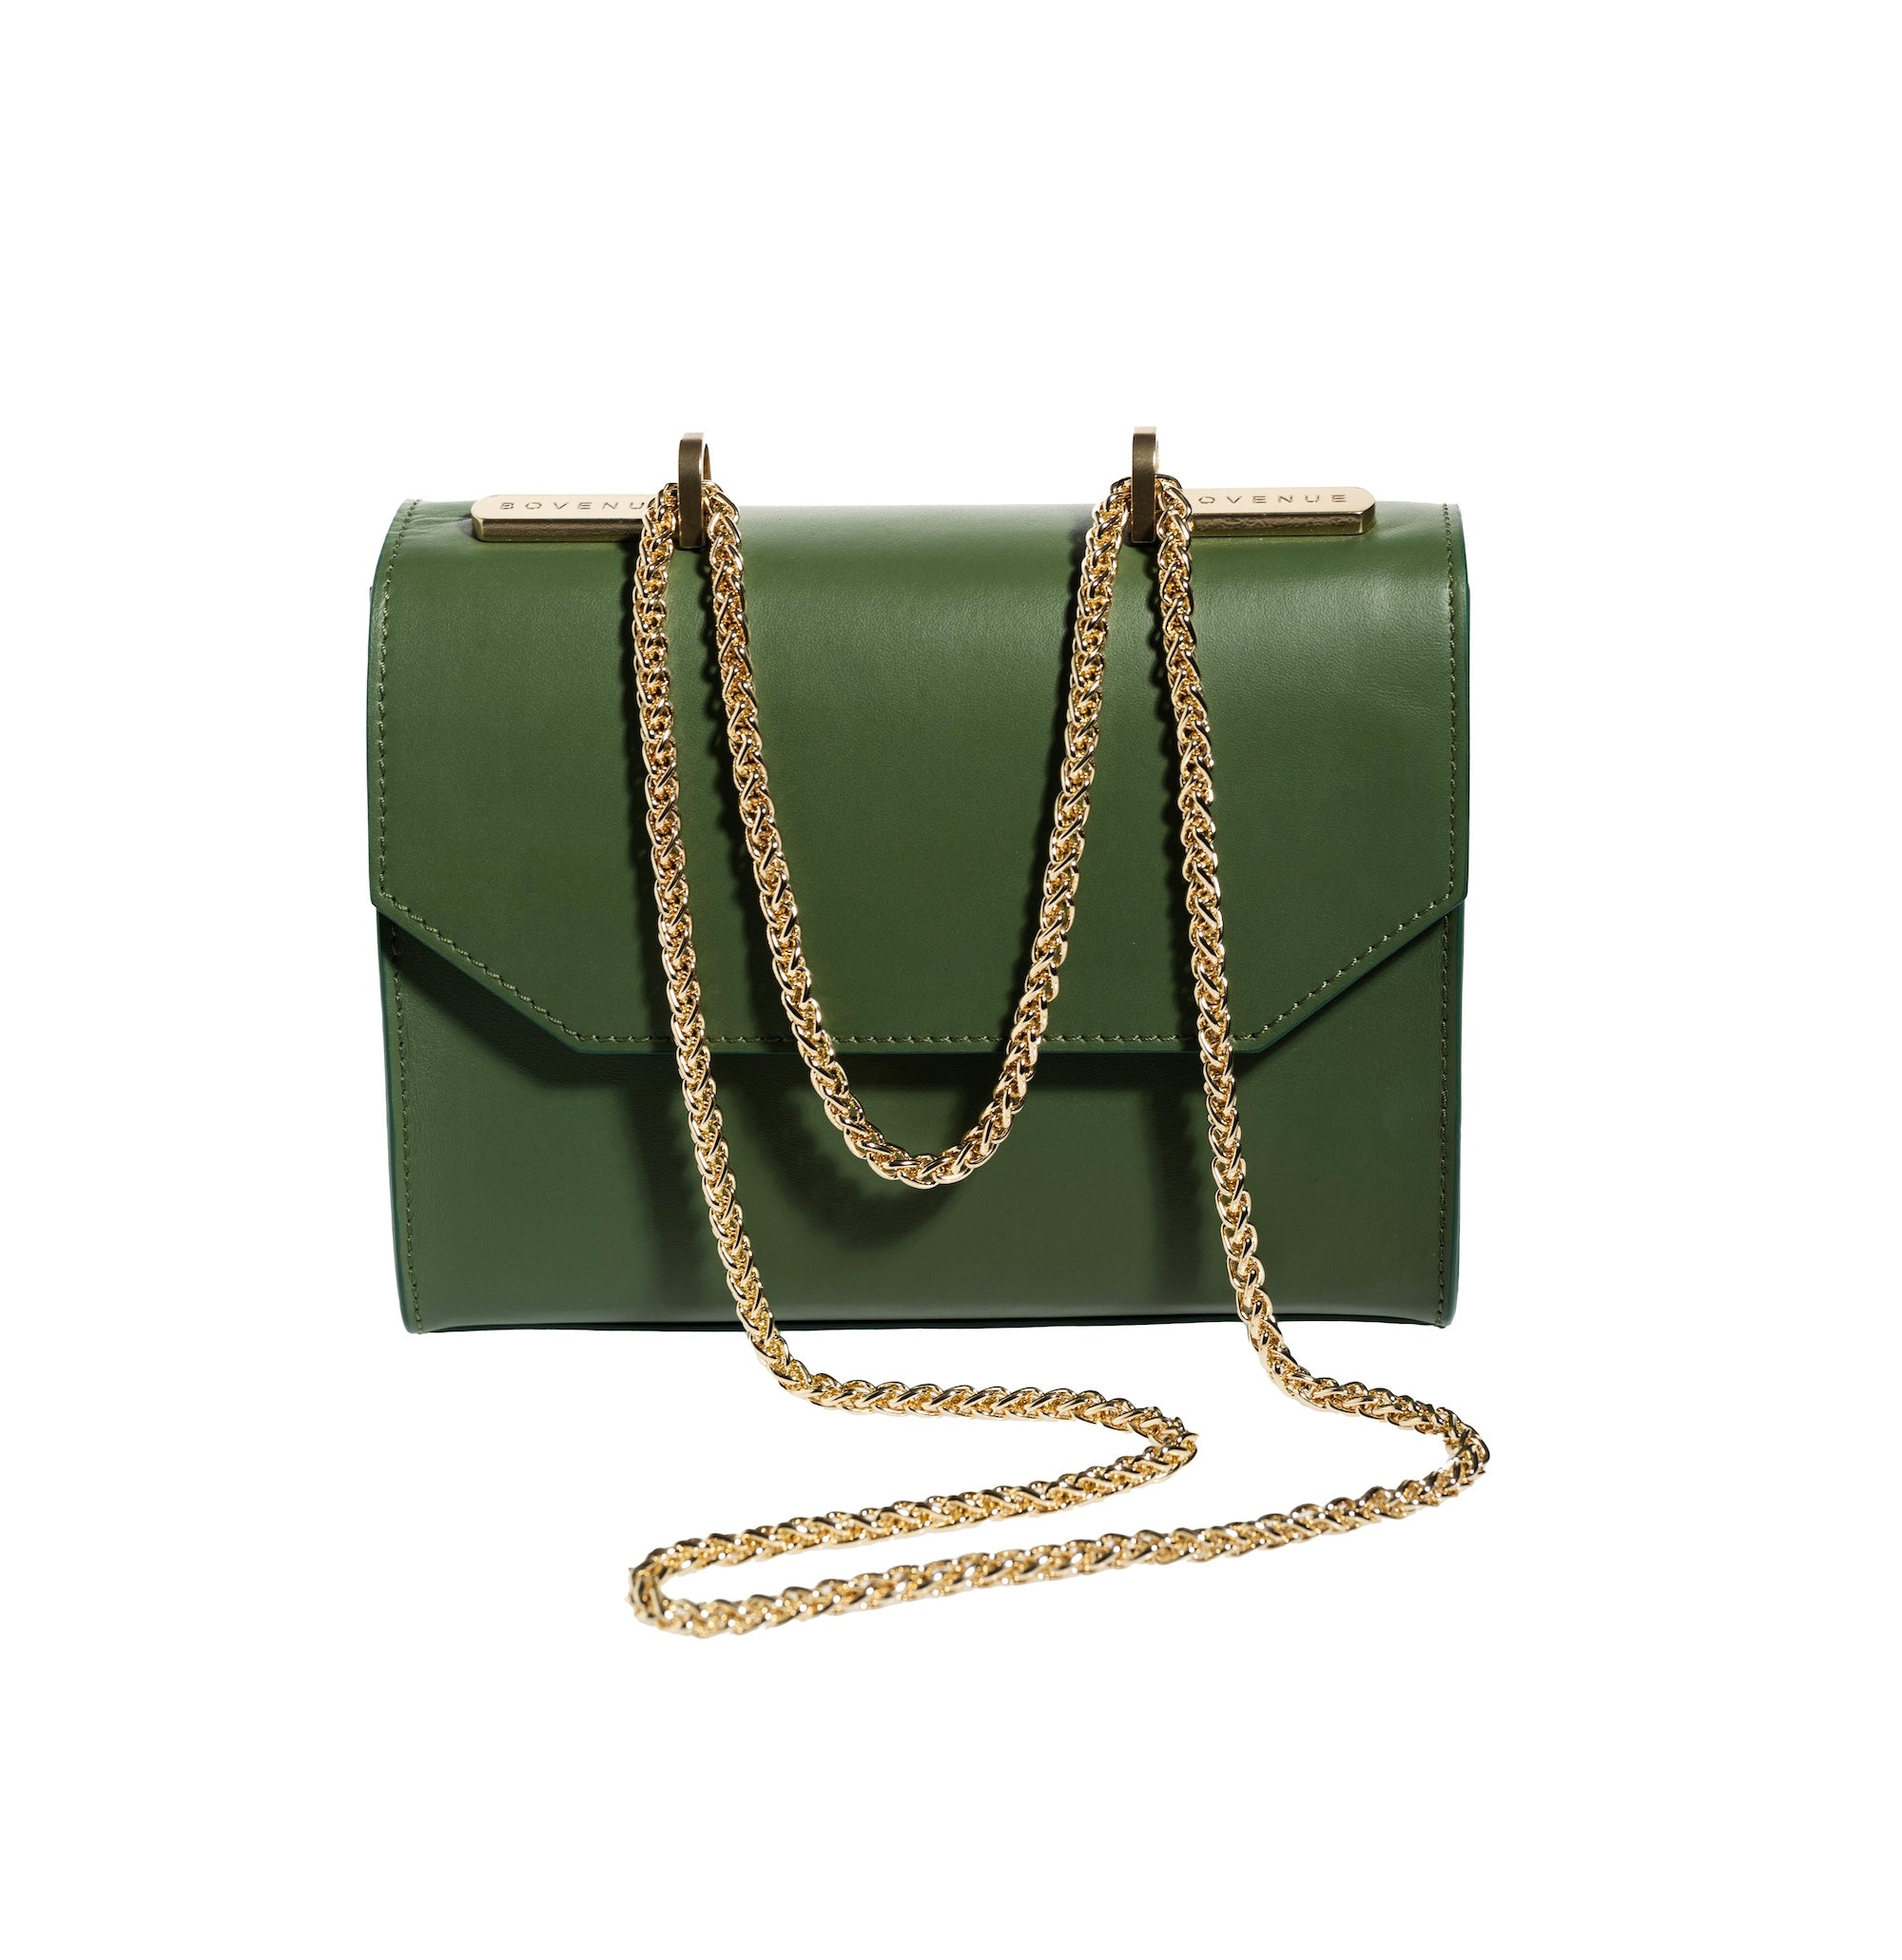 Nawal in Olive Green with Chain